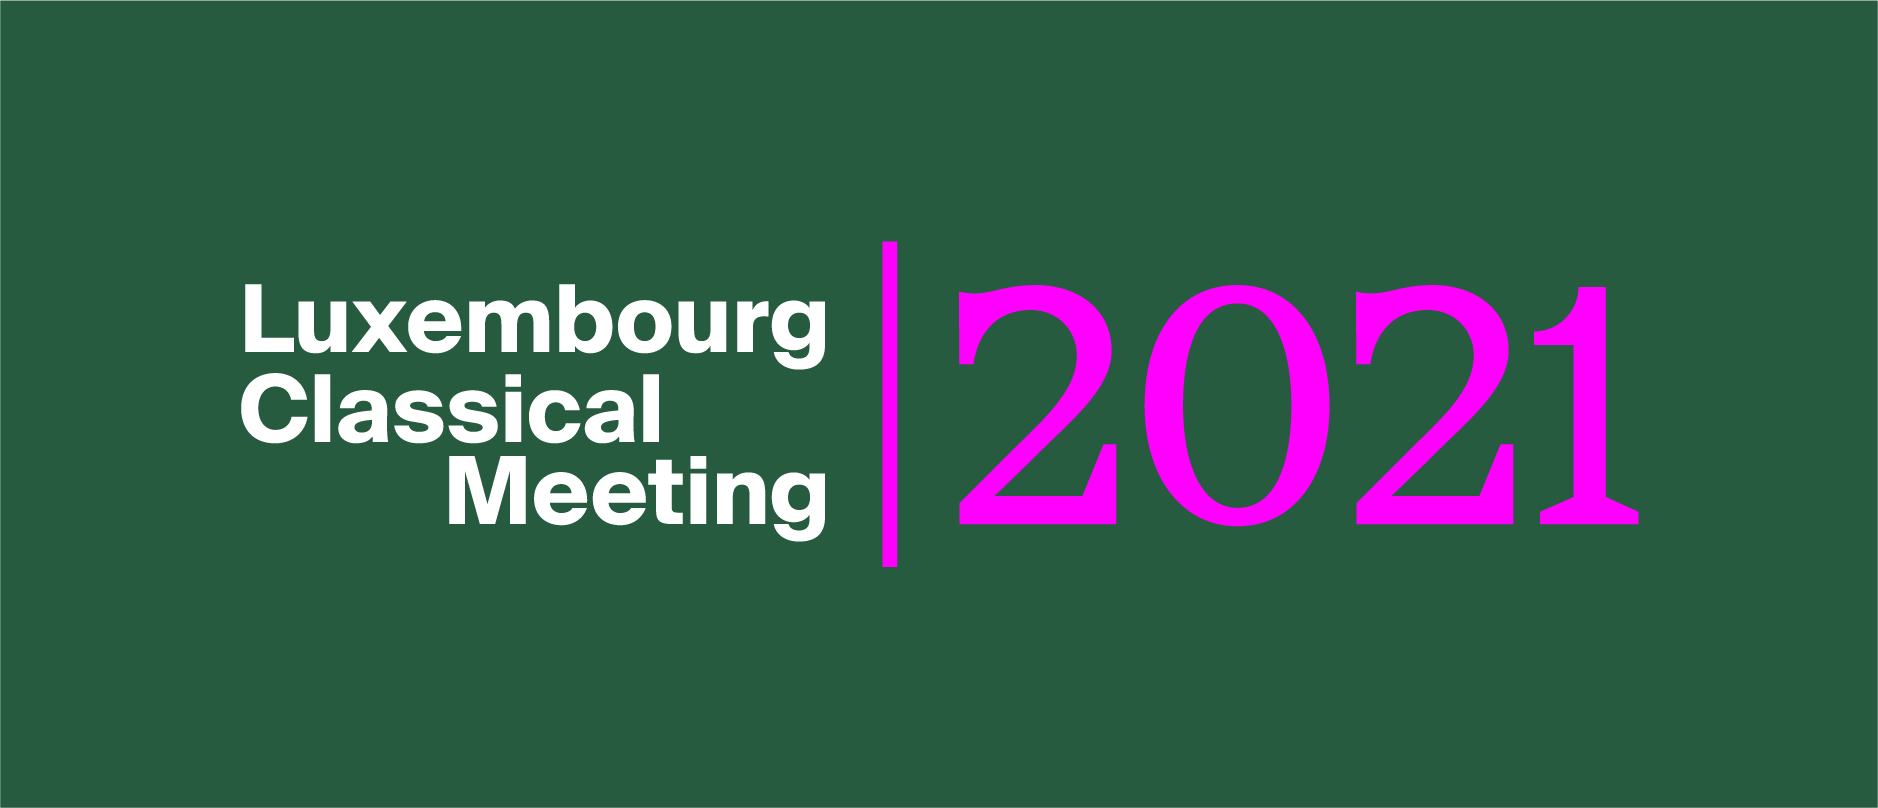 Luxembourg Classical Meeting showcases Luxembourgish's solists, ensembles and young talents